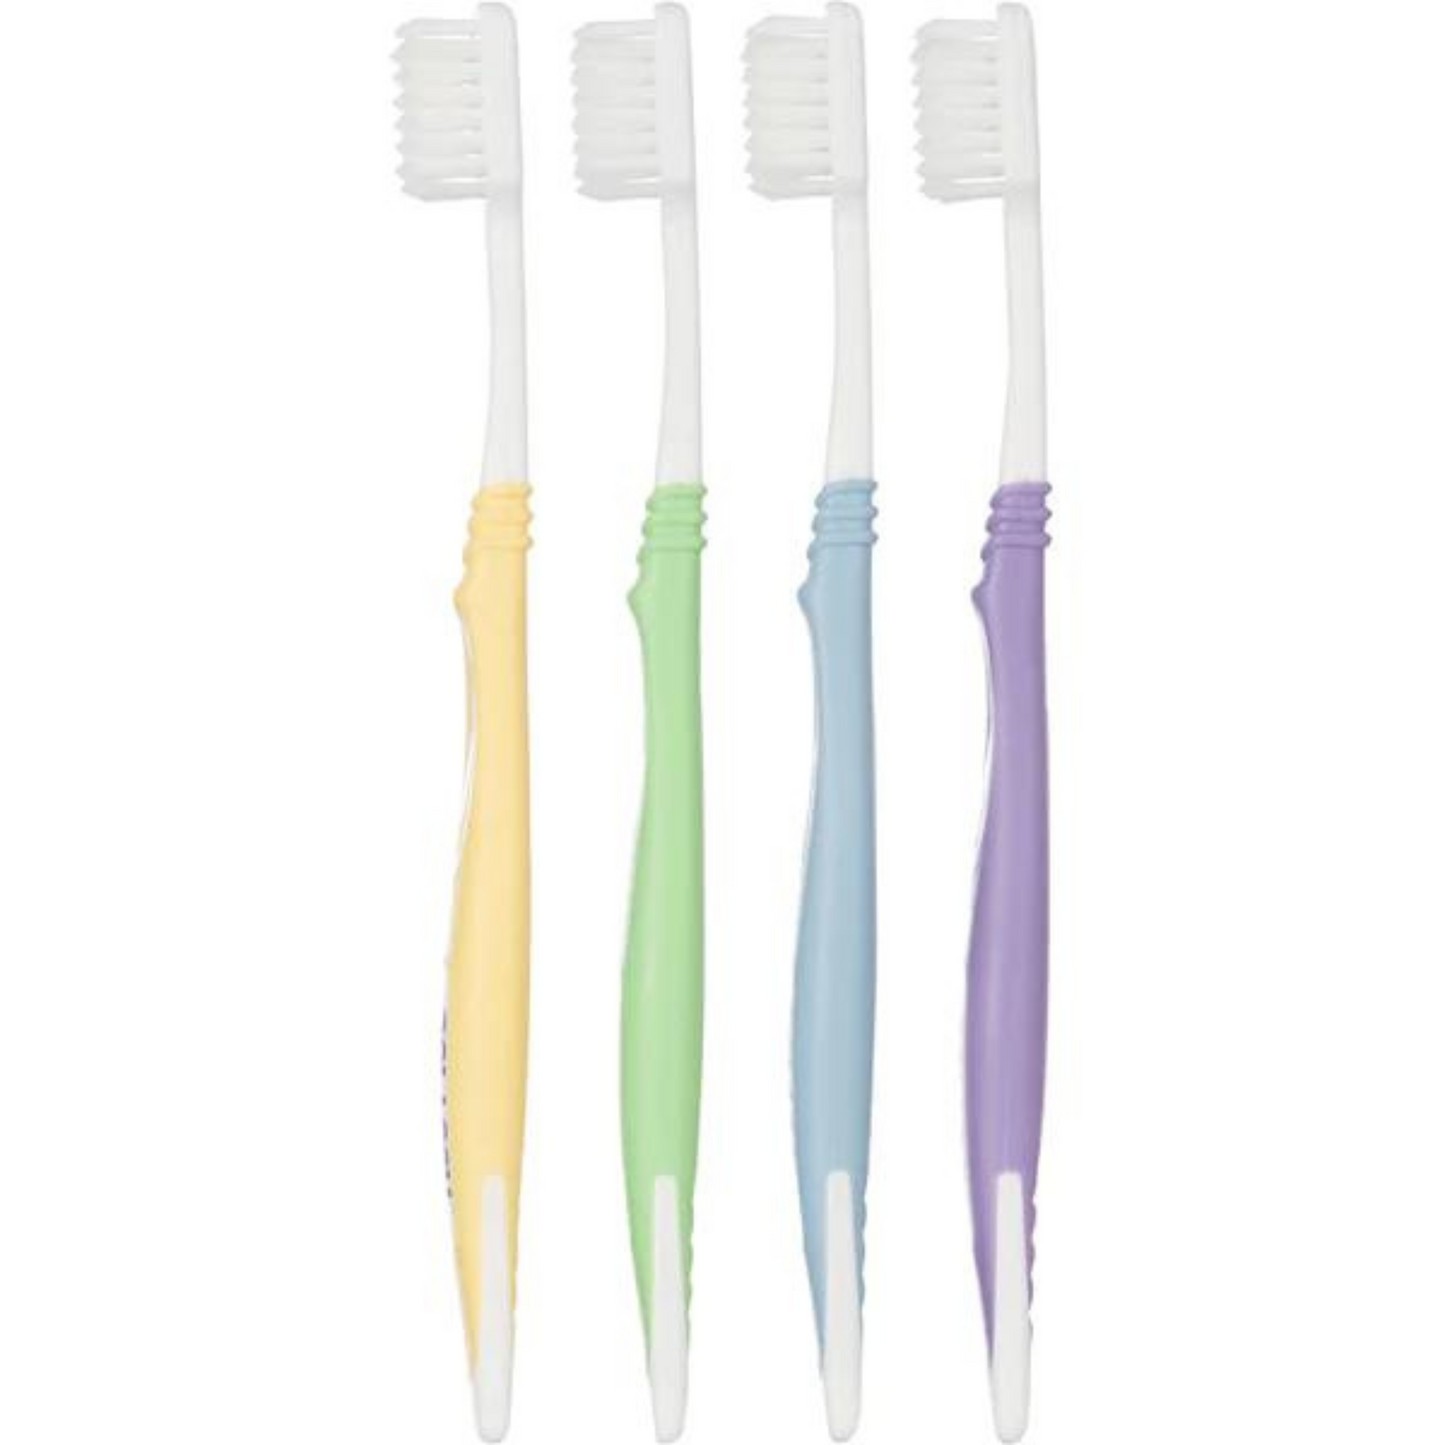 Primary Image of SoFresh Oral Care SoFresh Gum Massage Toothbrush